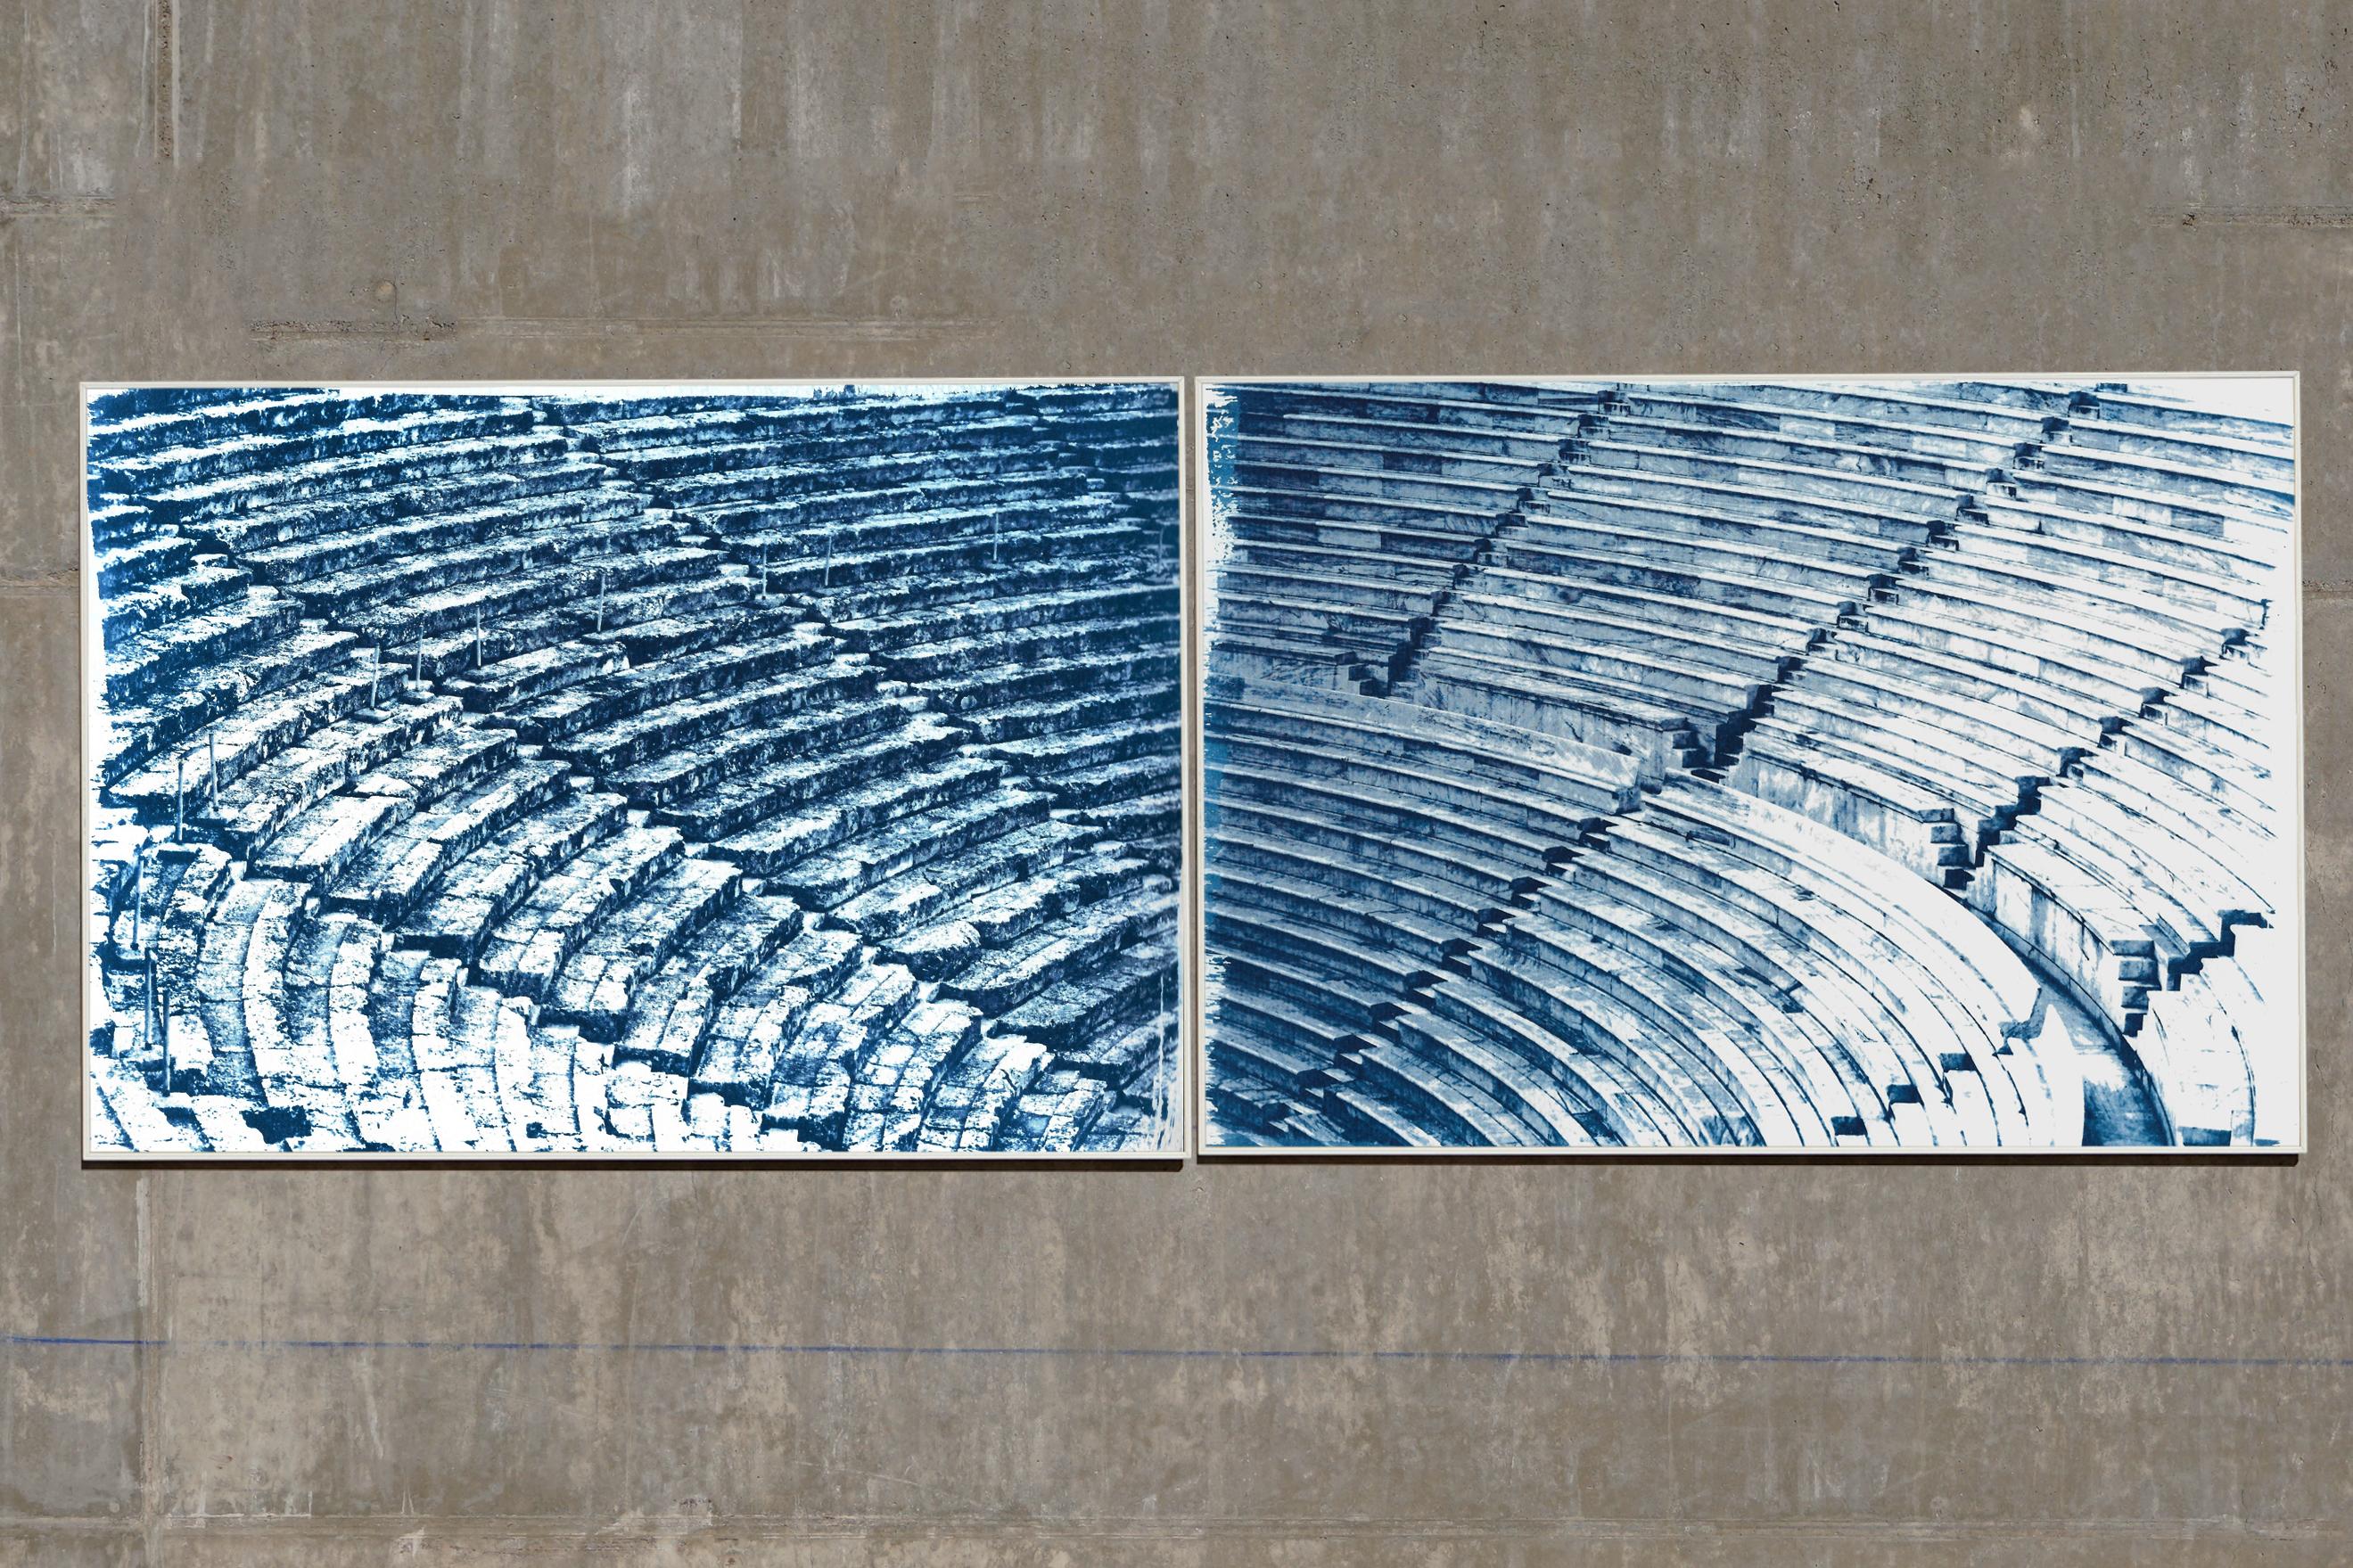 Diptych of Ancient Theatre, Multi-panel Cyanotype, Greek and Roman Architecture - Photograph by Kind of Cyan